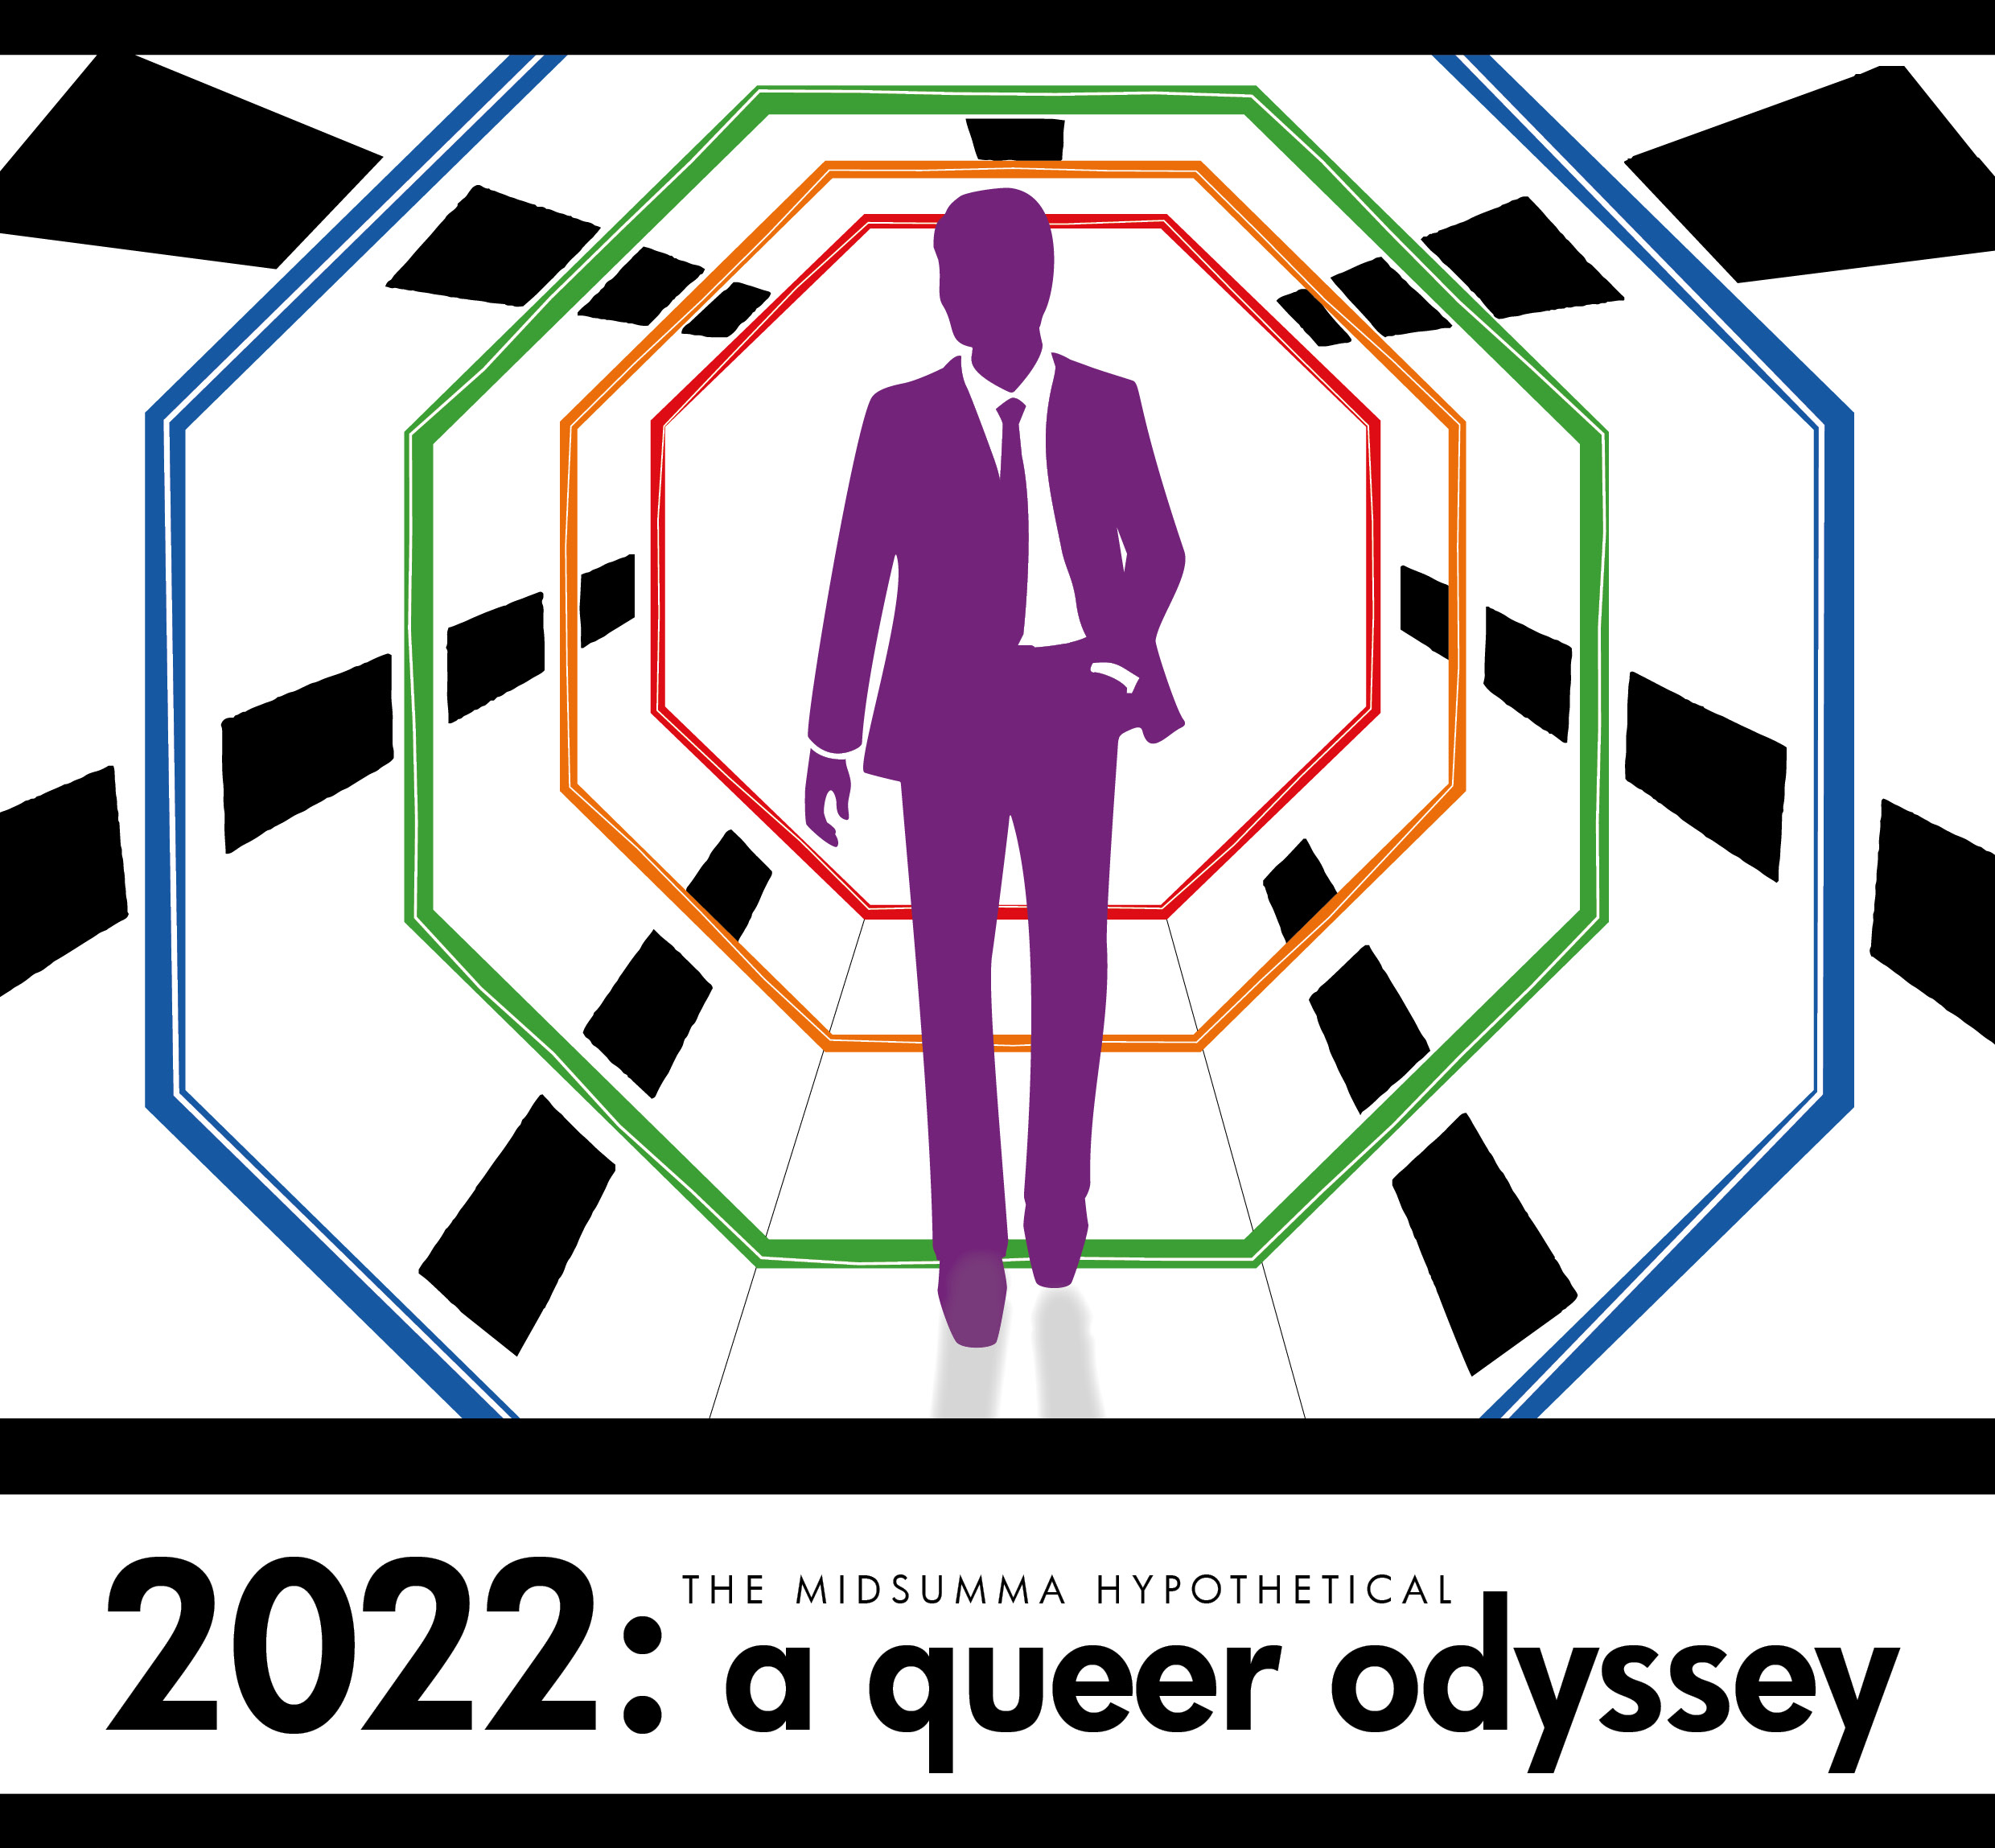 The 2016 VAC Hypothetical – 2022: a queer odyssey